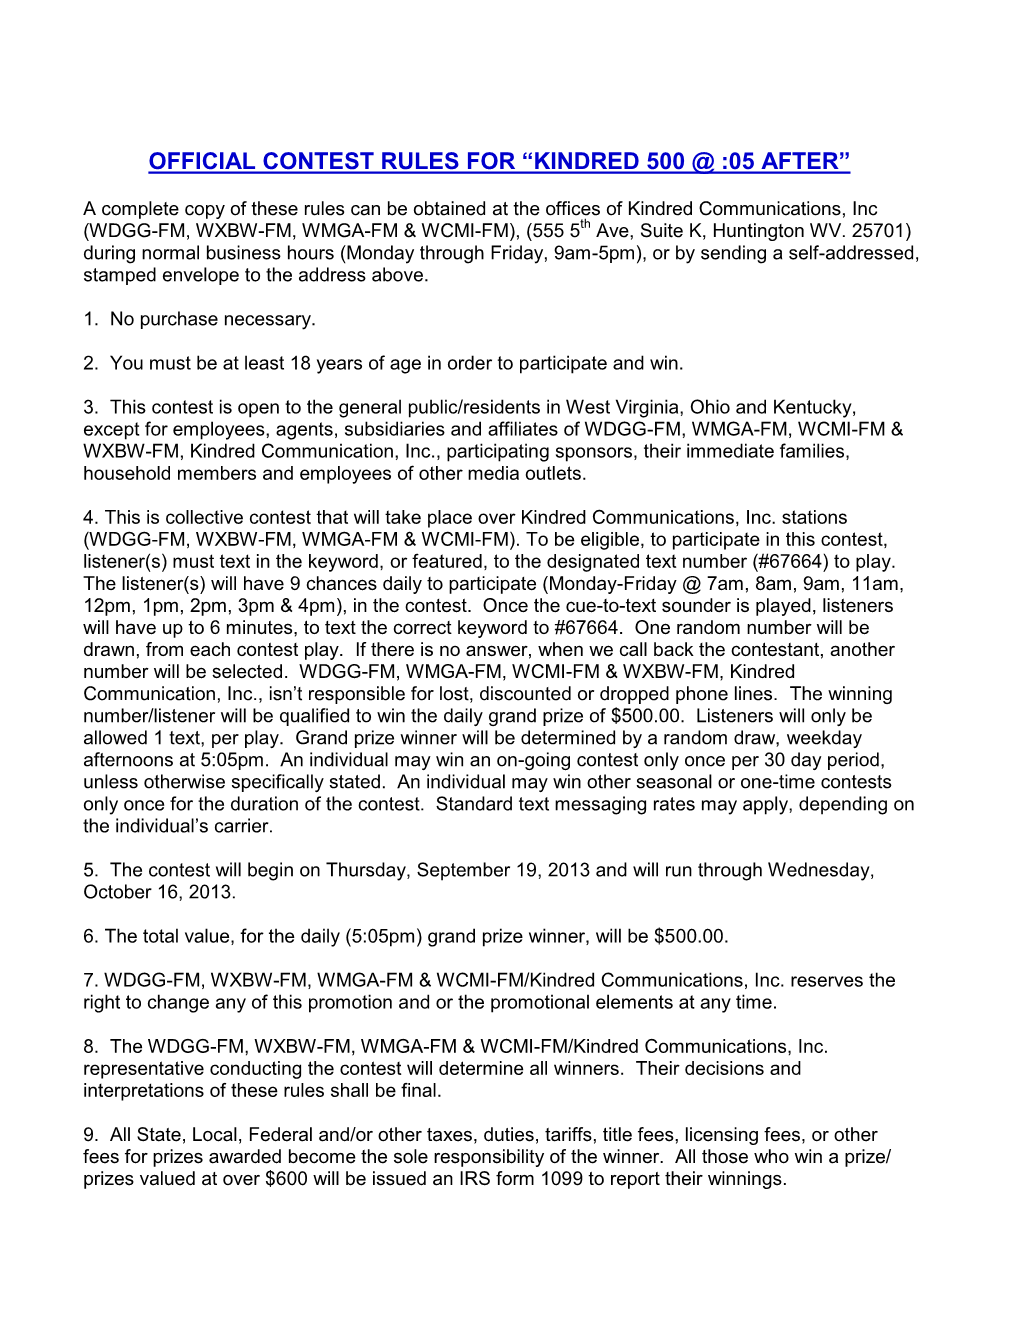 Official Contest Rules for the Wxbw “Bob's Holiday